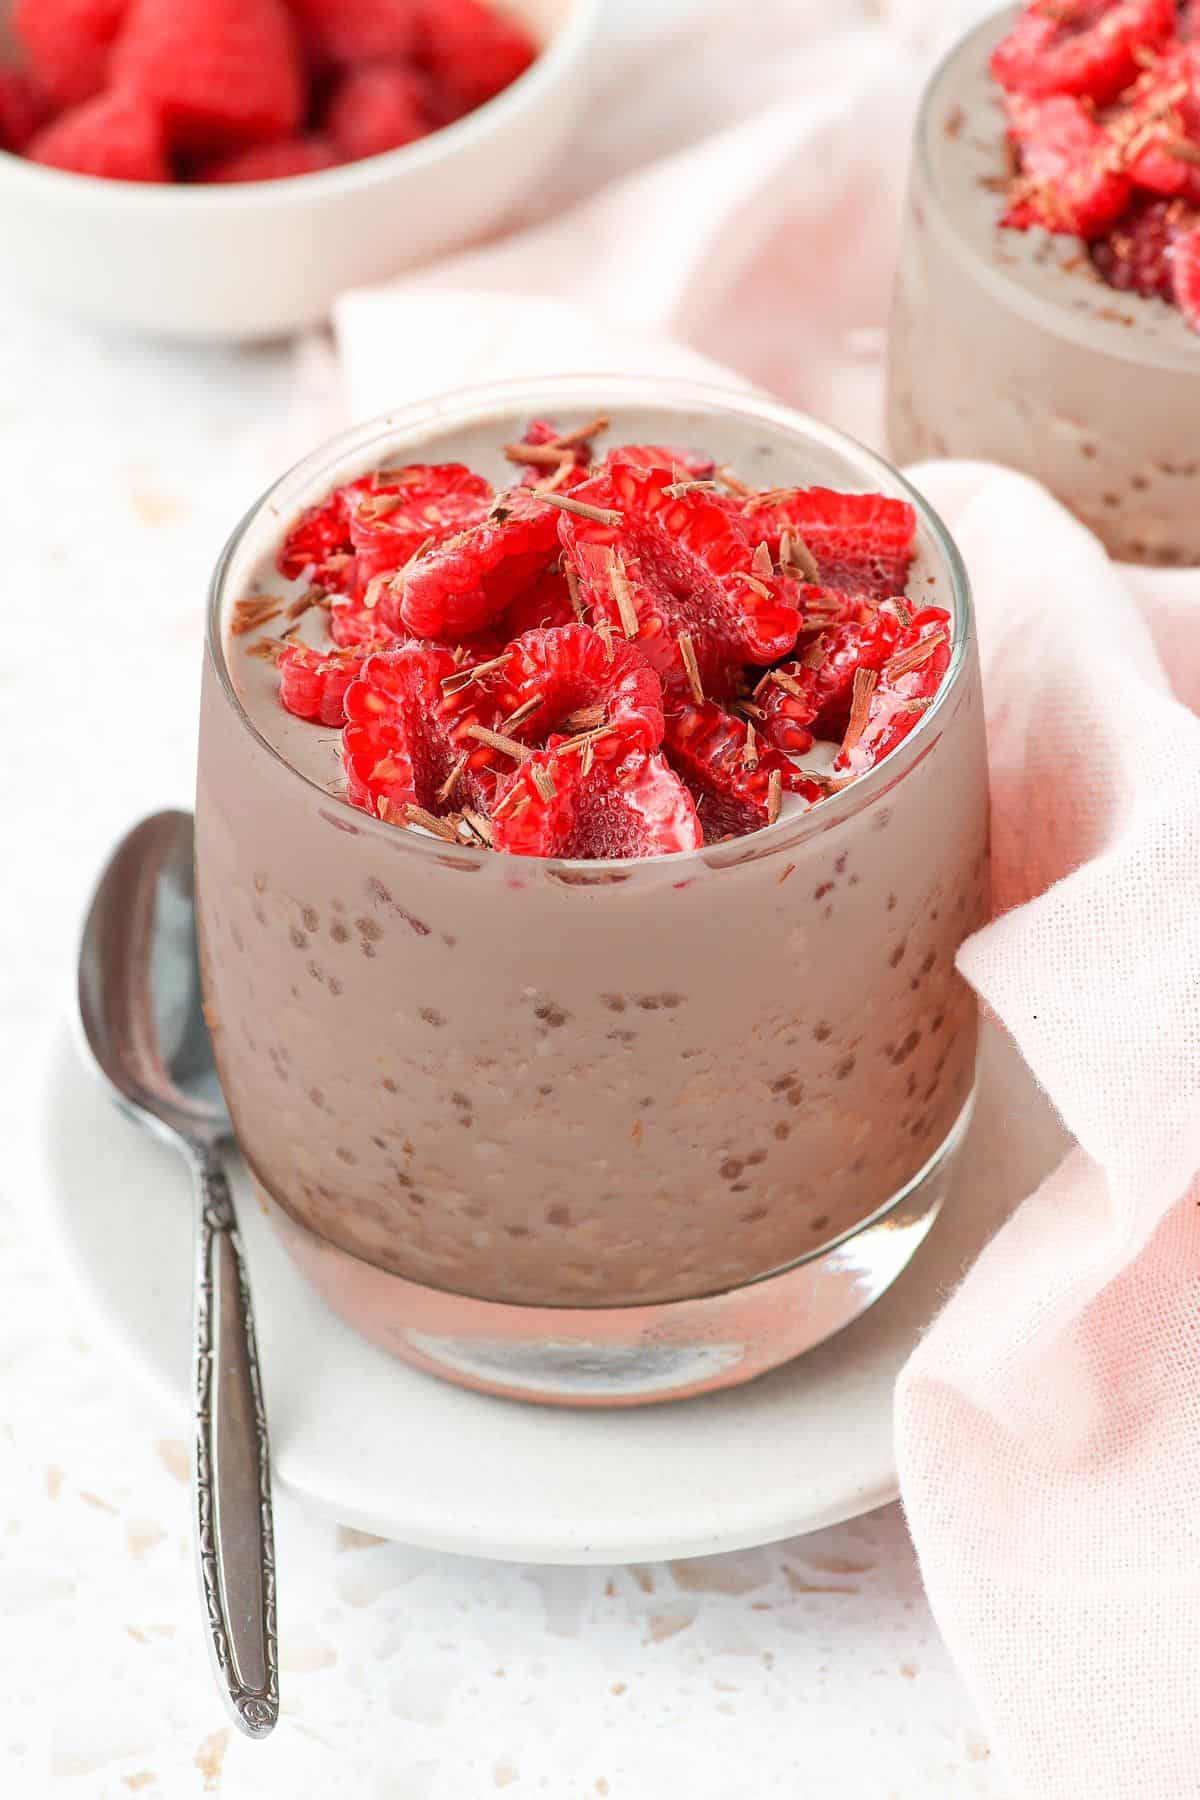 Jar of overnight oats, garnished with raspberries and chocolate shavings sitting on a small plate with a spoon on the edge.